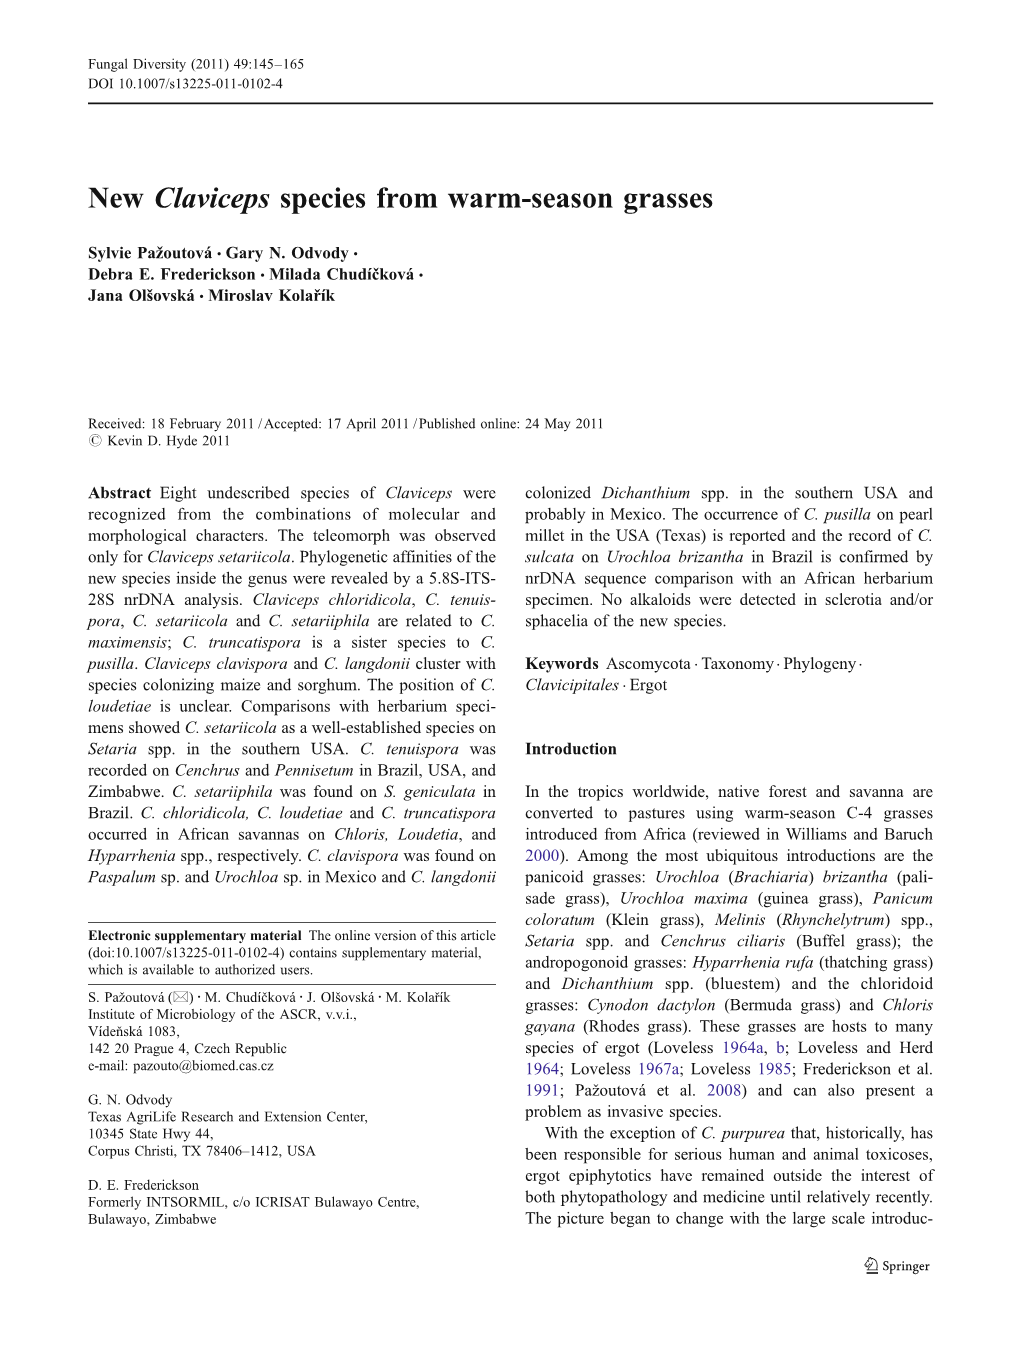 New Claviceps Species from Warm-Season Grasses